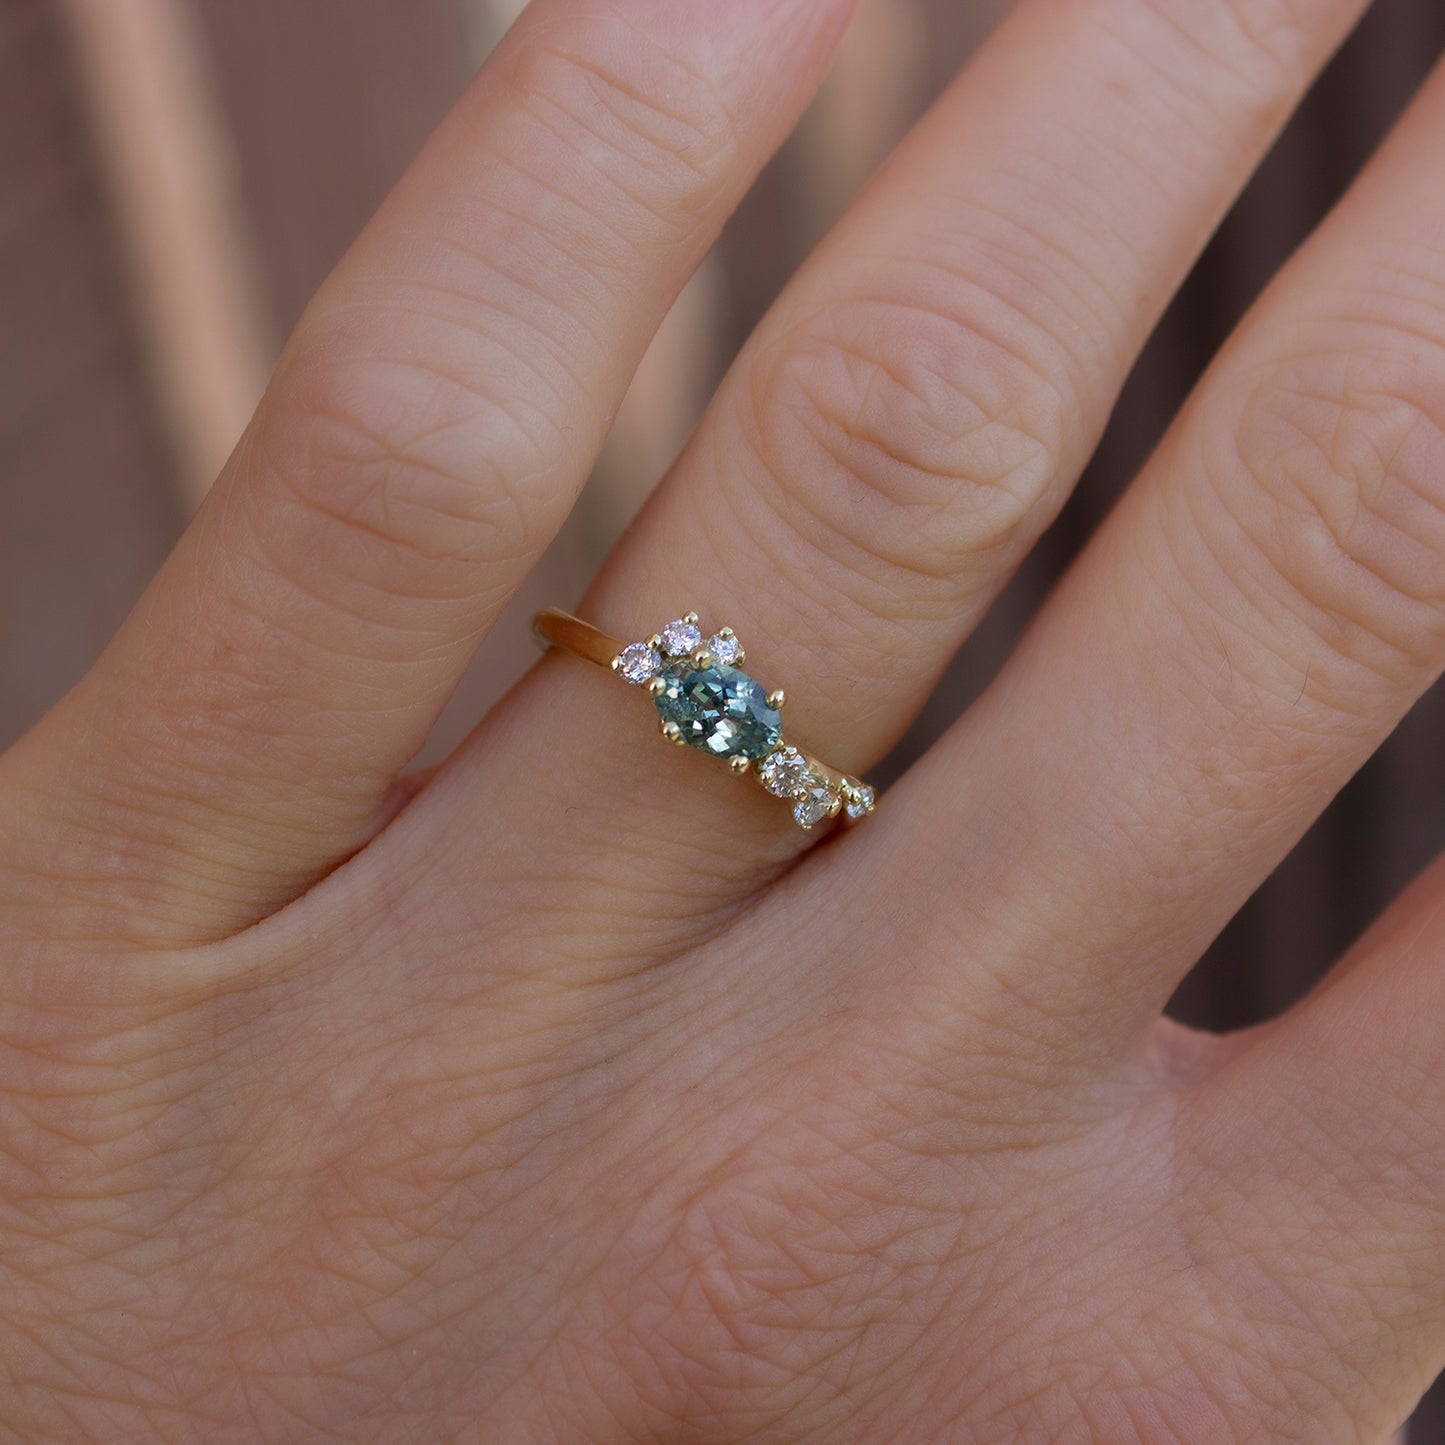 Delicate and beautiful ring featuring teal sapphire and white diamonds. Perfect option as an alternative engagement ring for a modern bride.